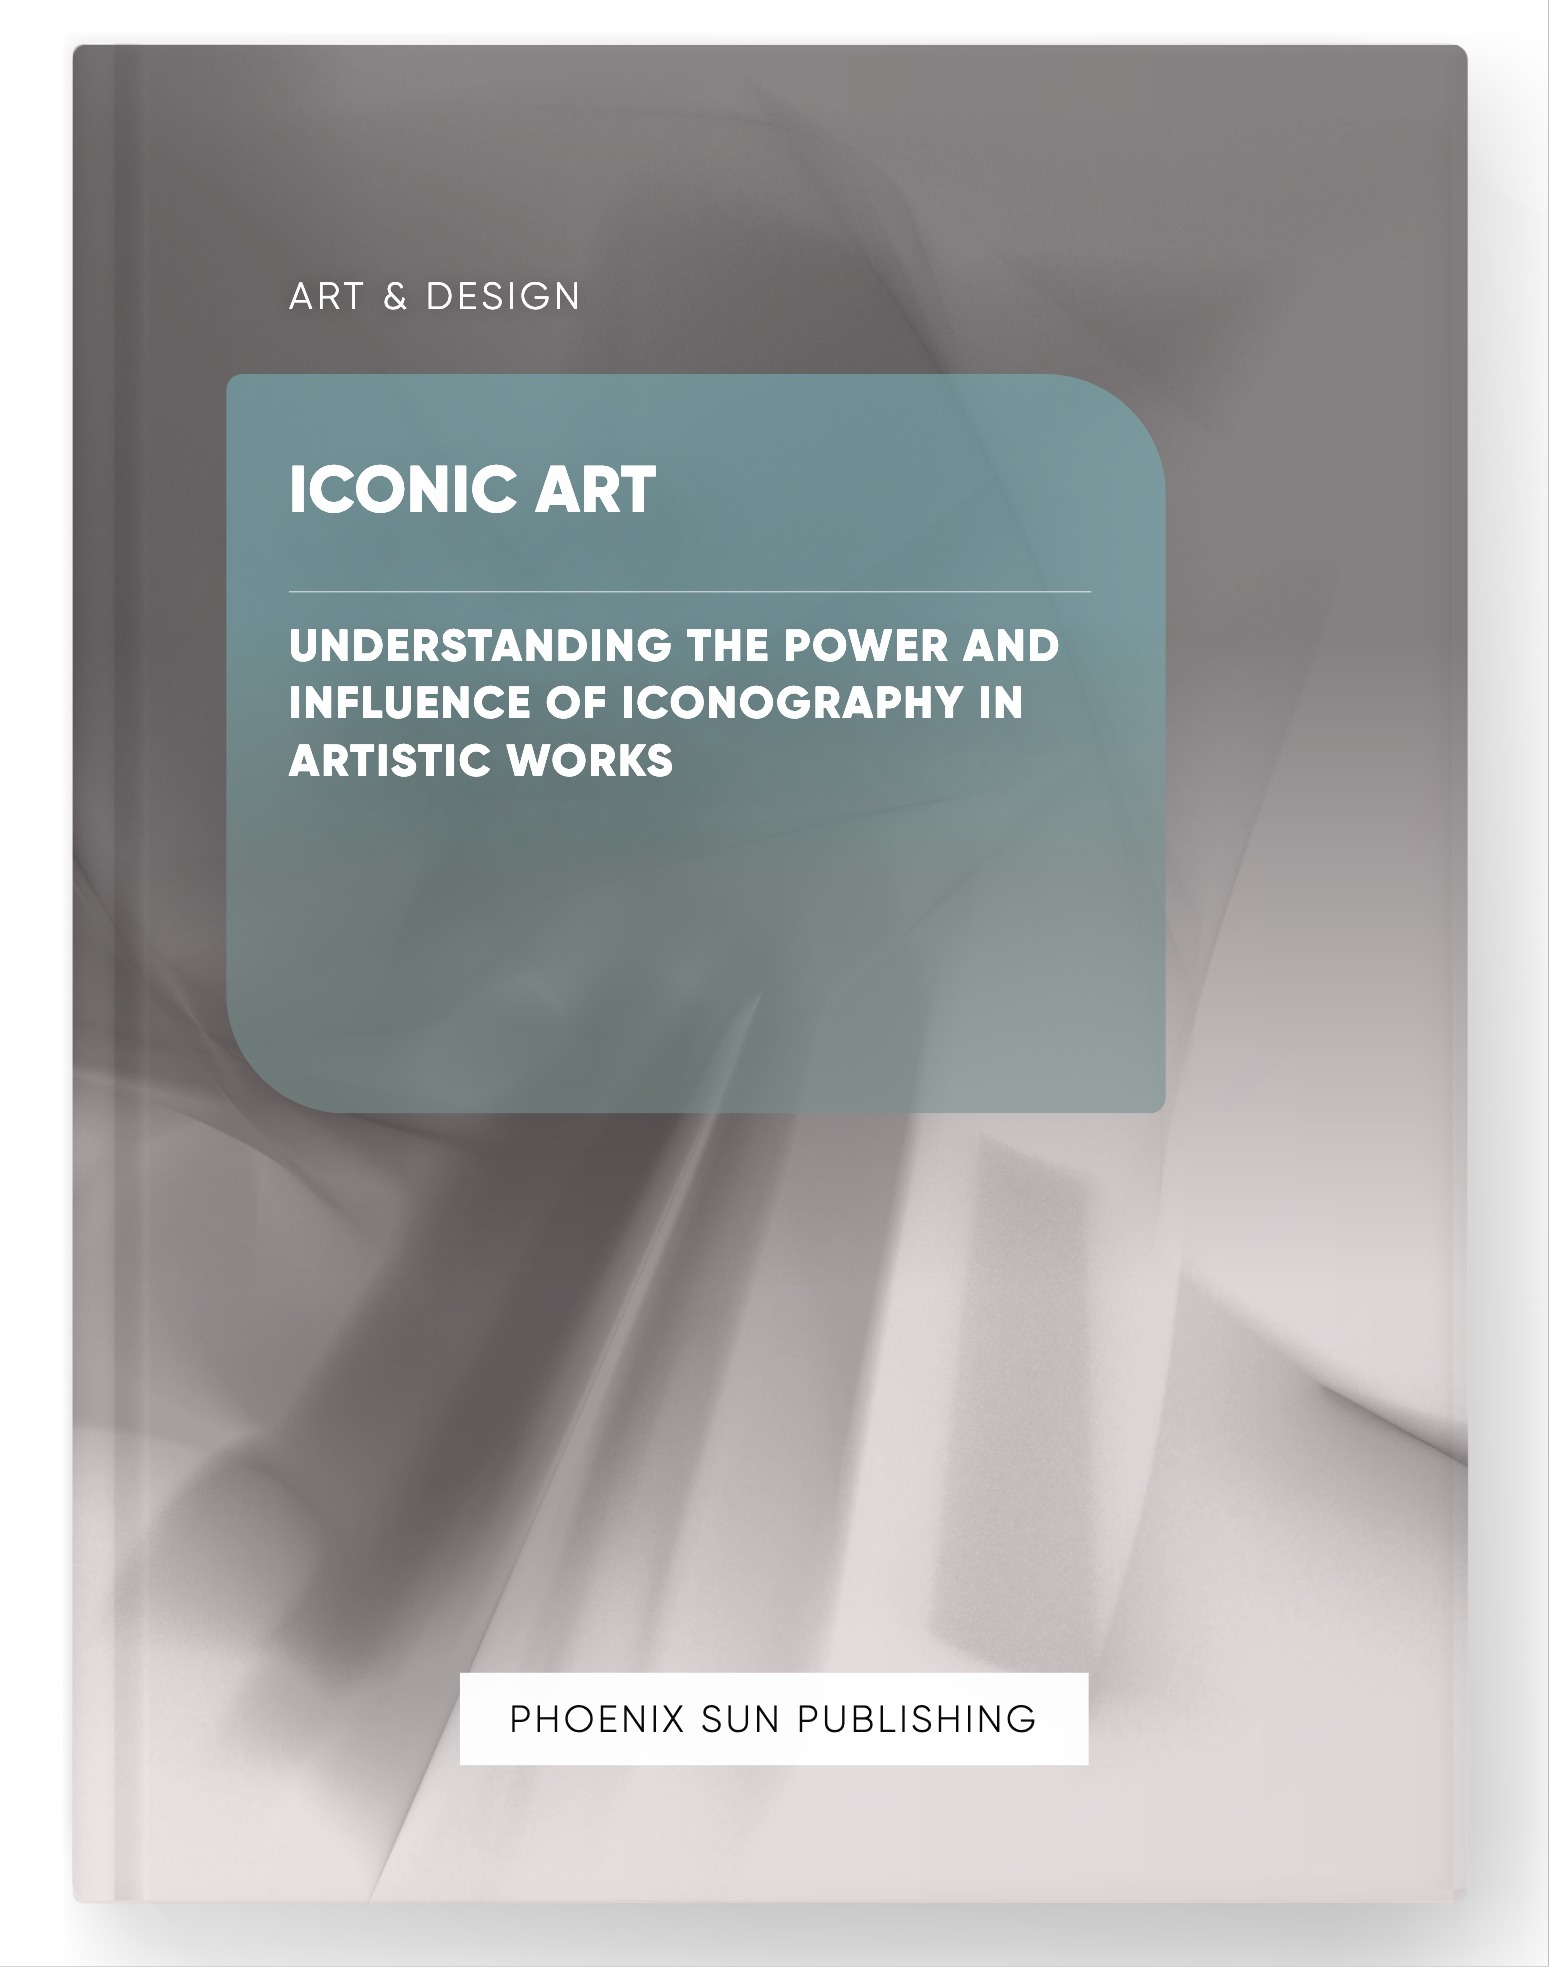 Iconic Art – Understanding the Power and Influence of Iconography in Artistic Works